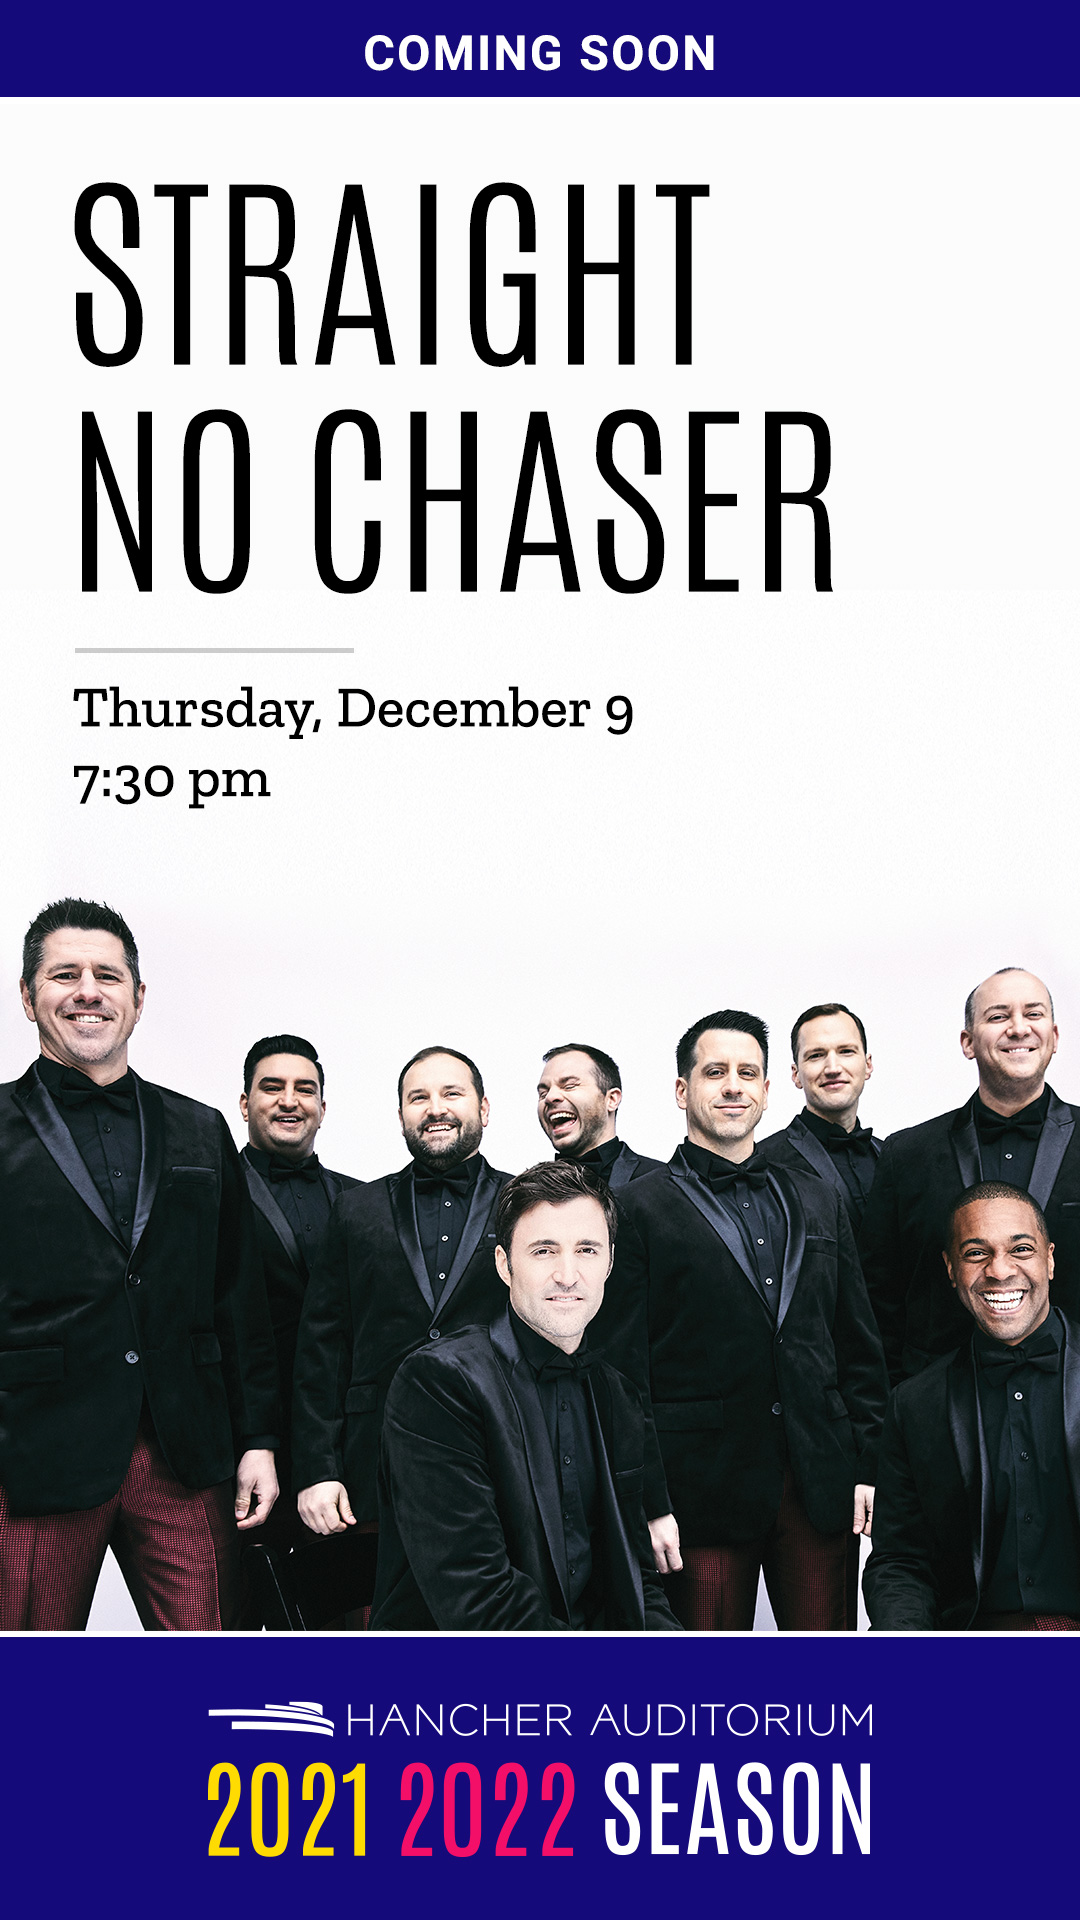 Straight No Chaser - Coming Soon